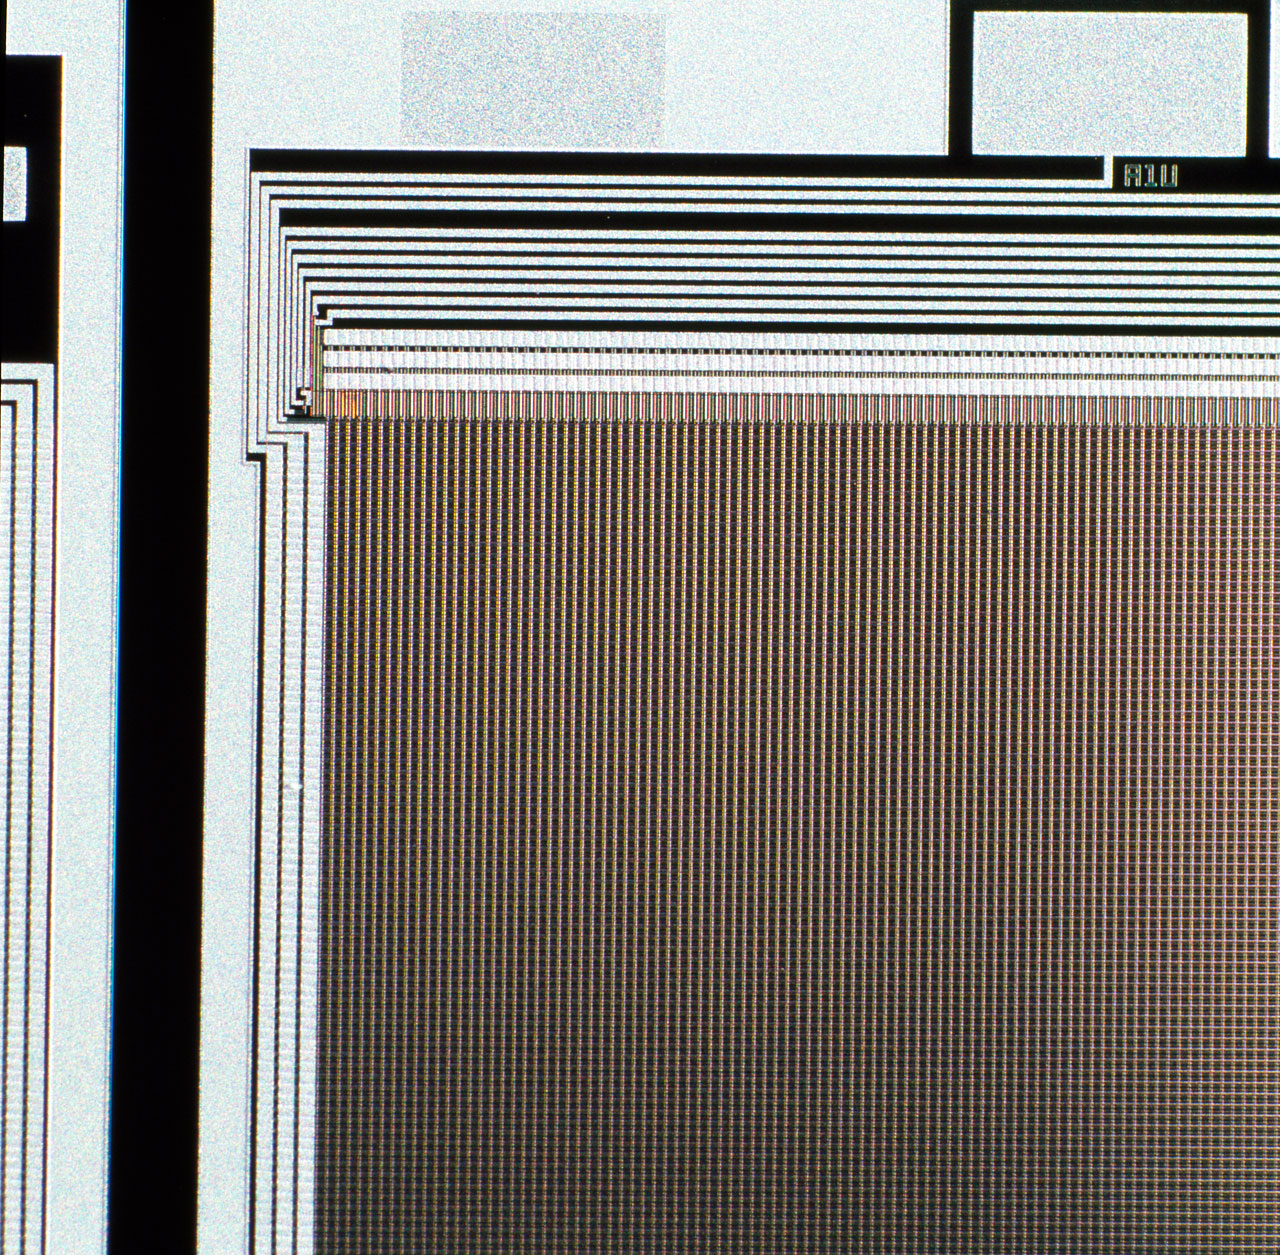 CCD wafer detail